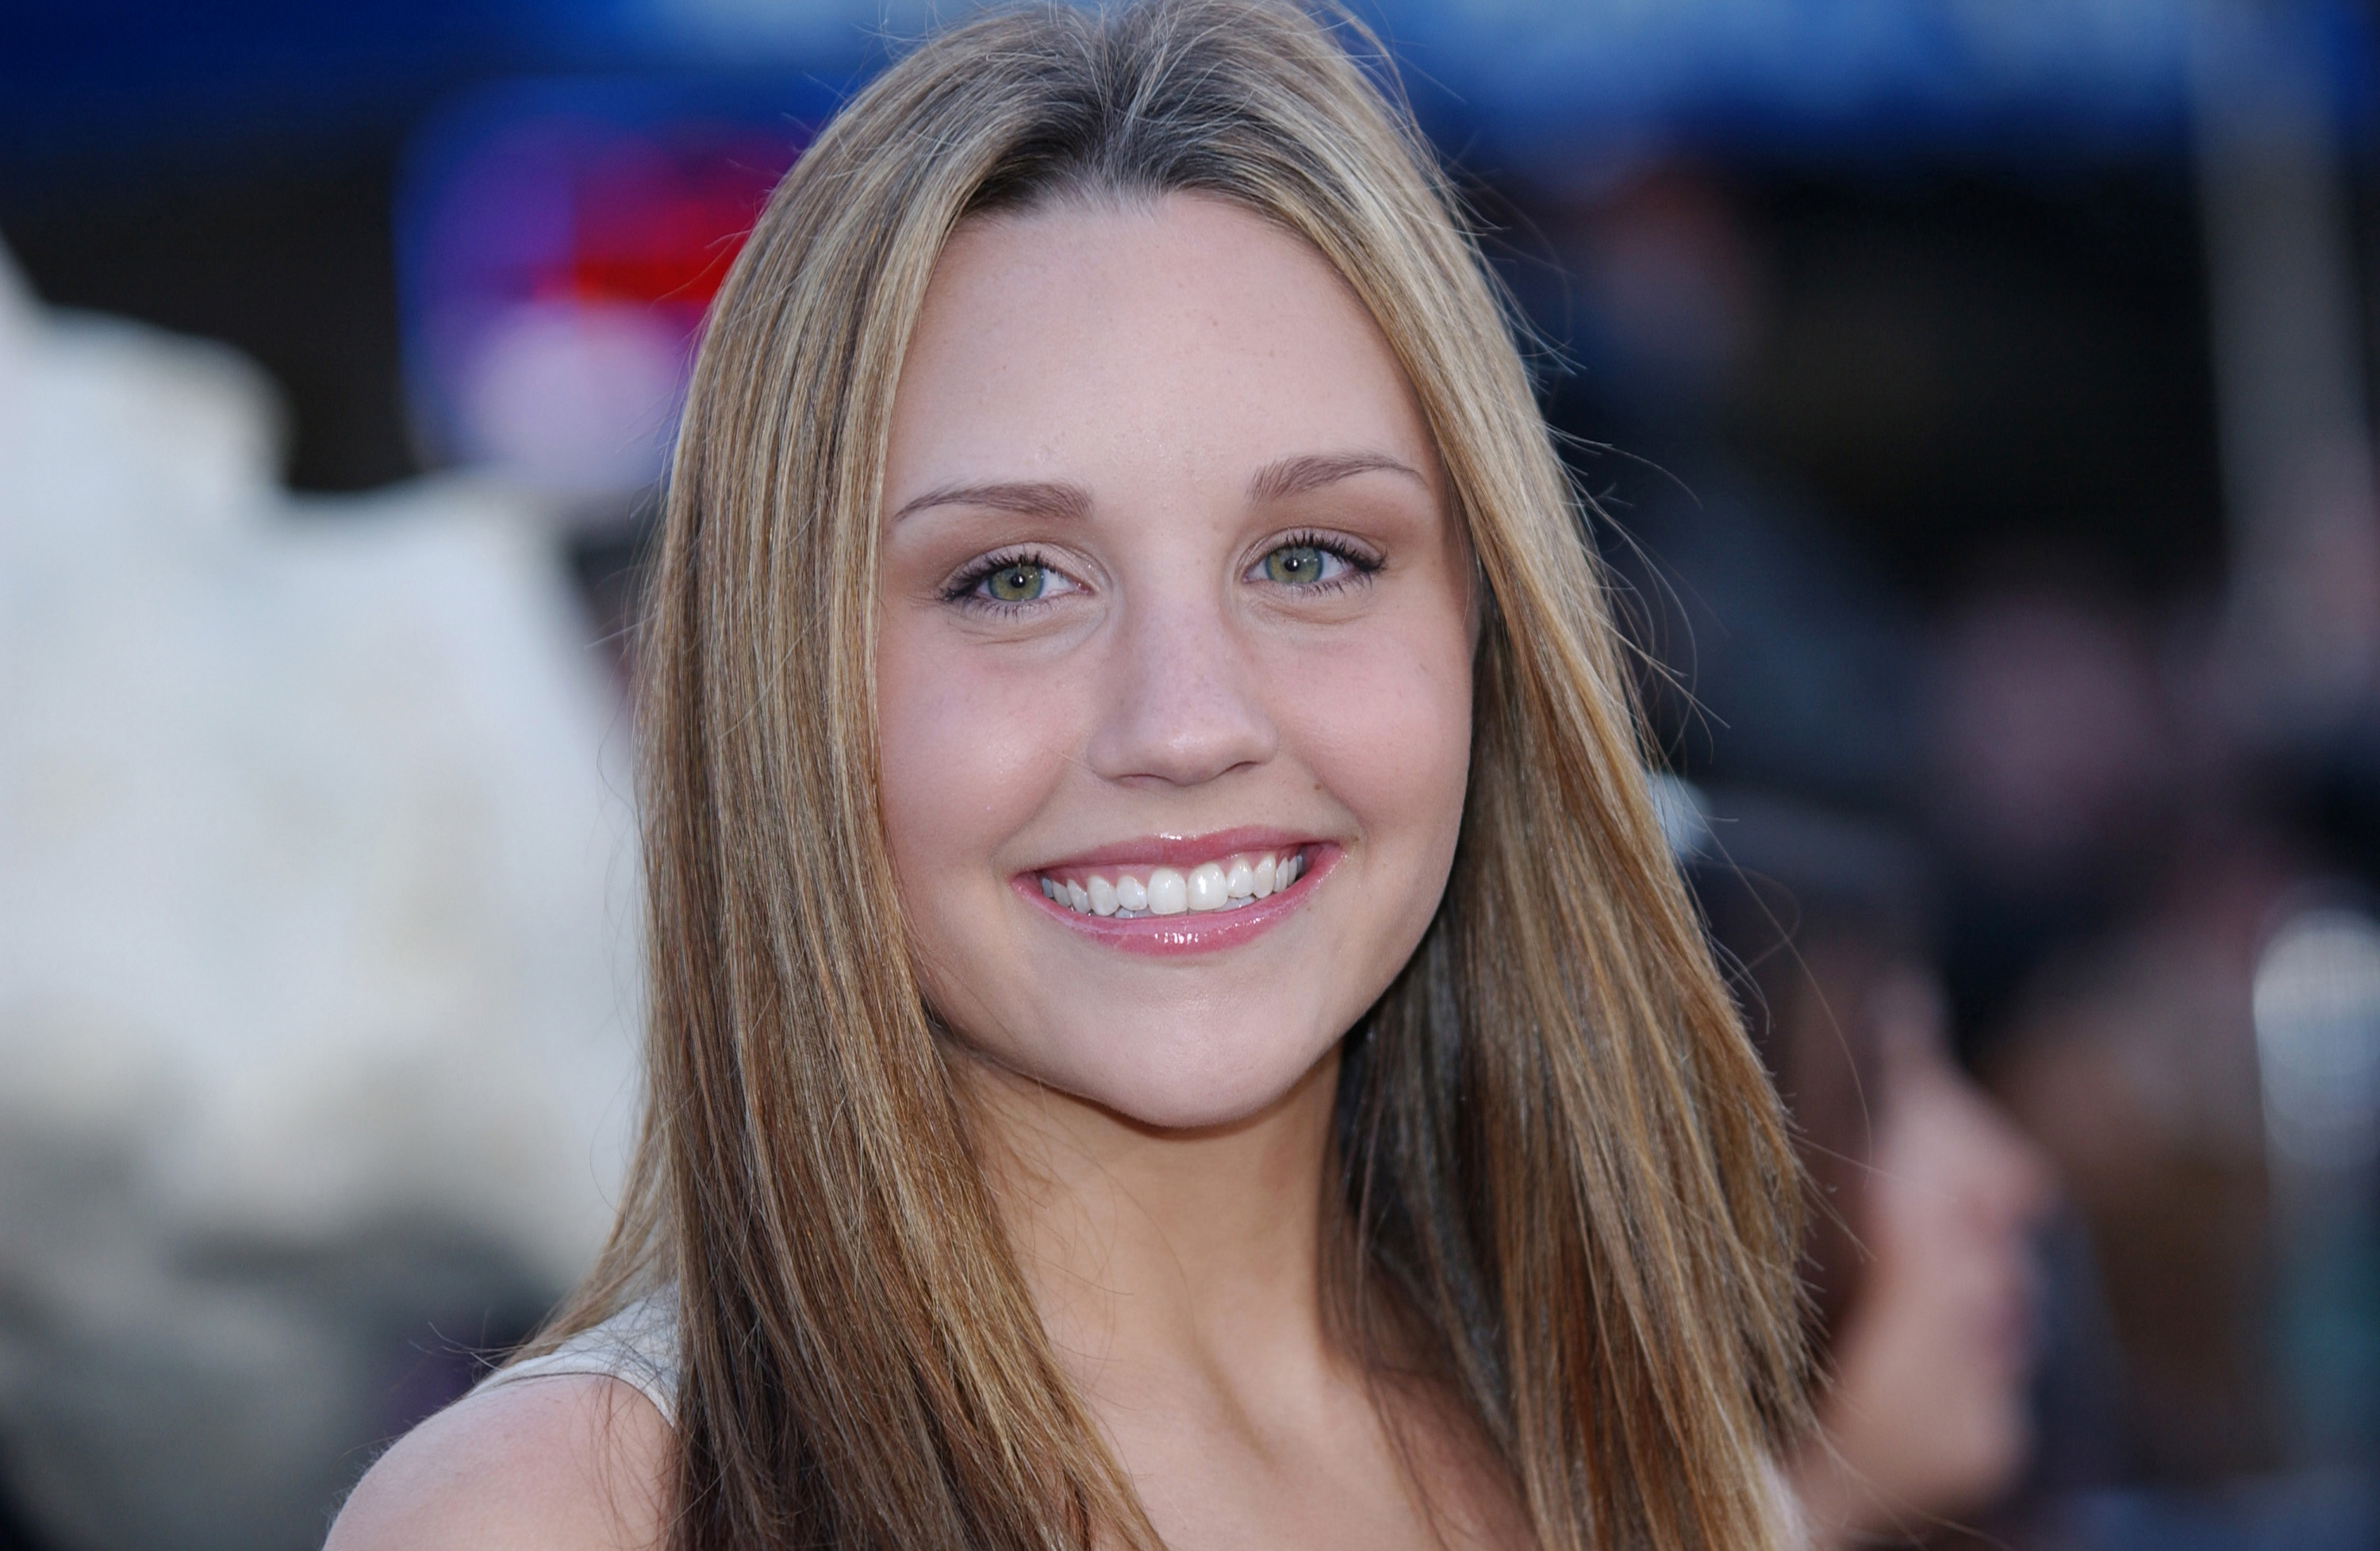 Amanda Bynes during the premiere of "The Matrix Reloaded" at The Mann Village Theater in Westwood, California on October 5, 2010 | Source: Getty Images